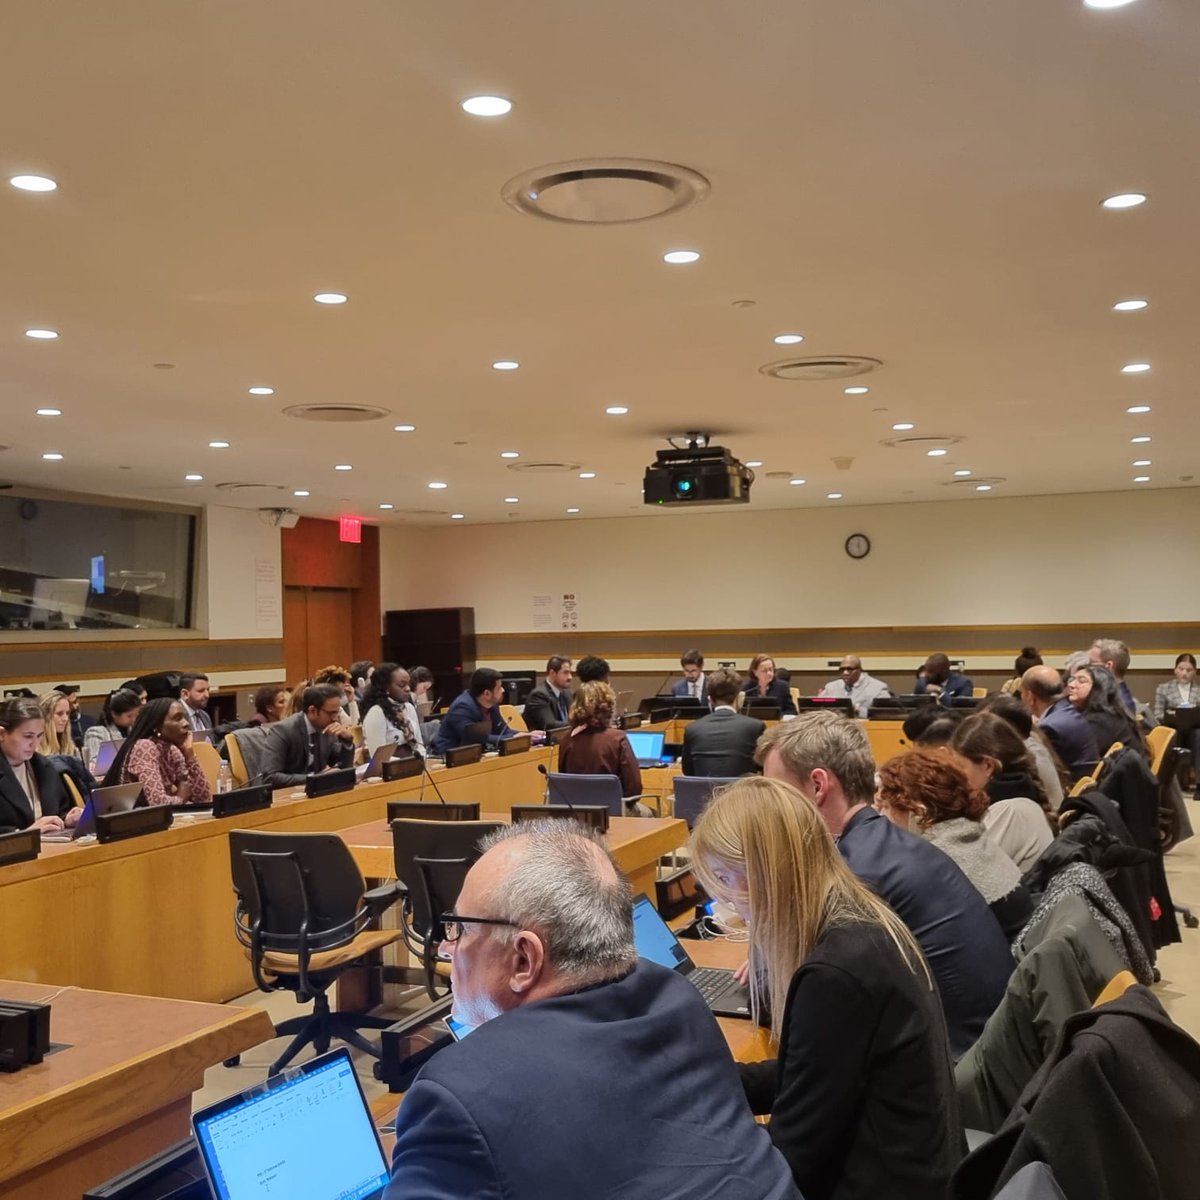 Today, the intergovernmental process on the Multidimensional Vulnerability Index was launched, under the leadership of @ABNYOffice and @Portugal_UN . Member States will consider the recommendations presented in the final #MVI report, which finally puts a face on vulnerability.